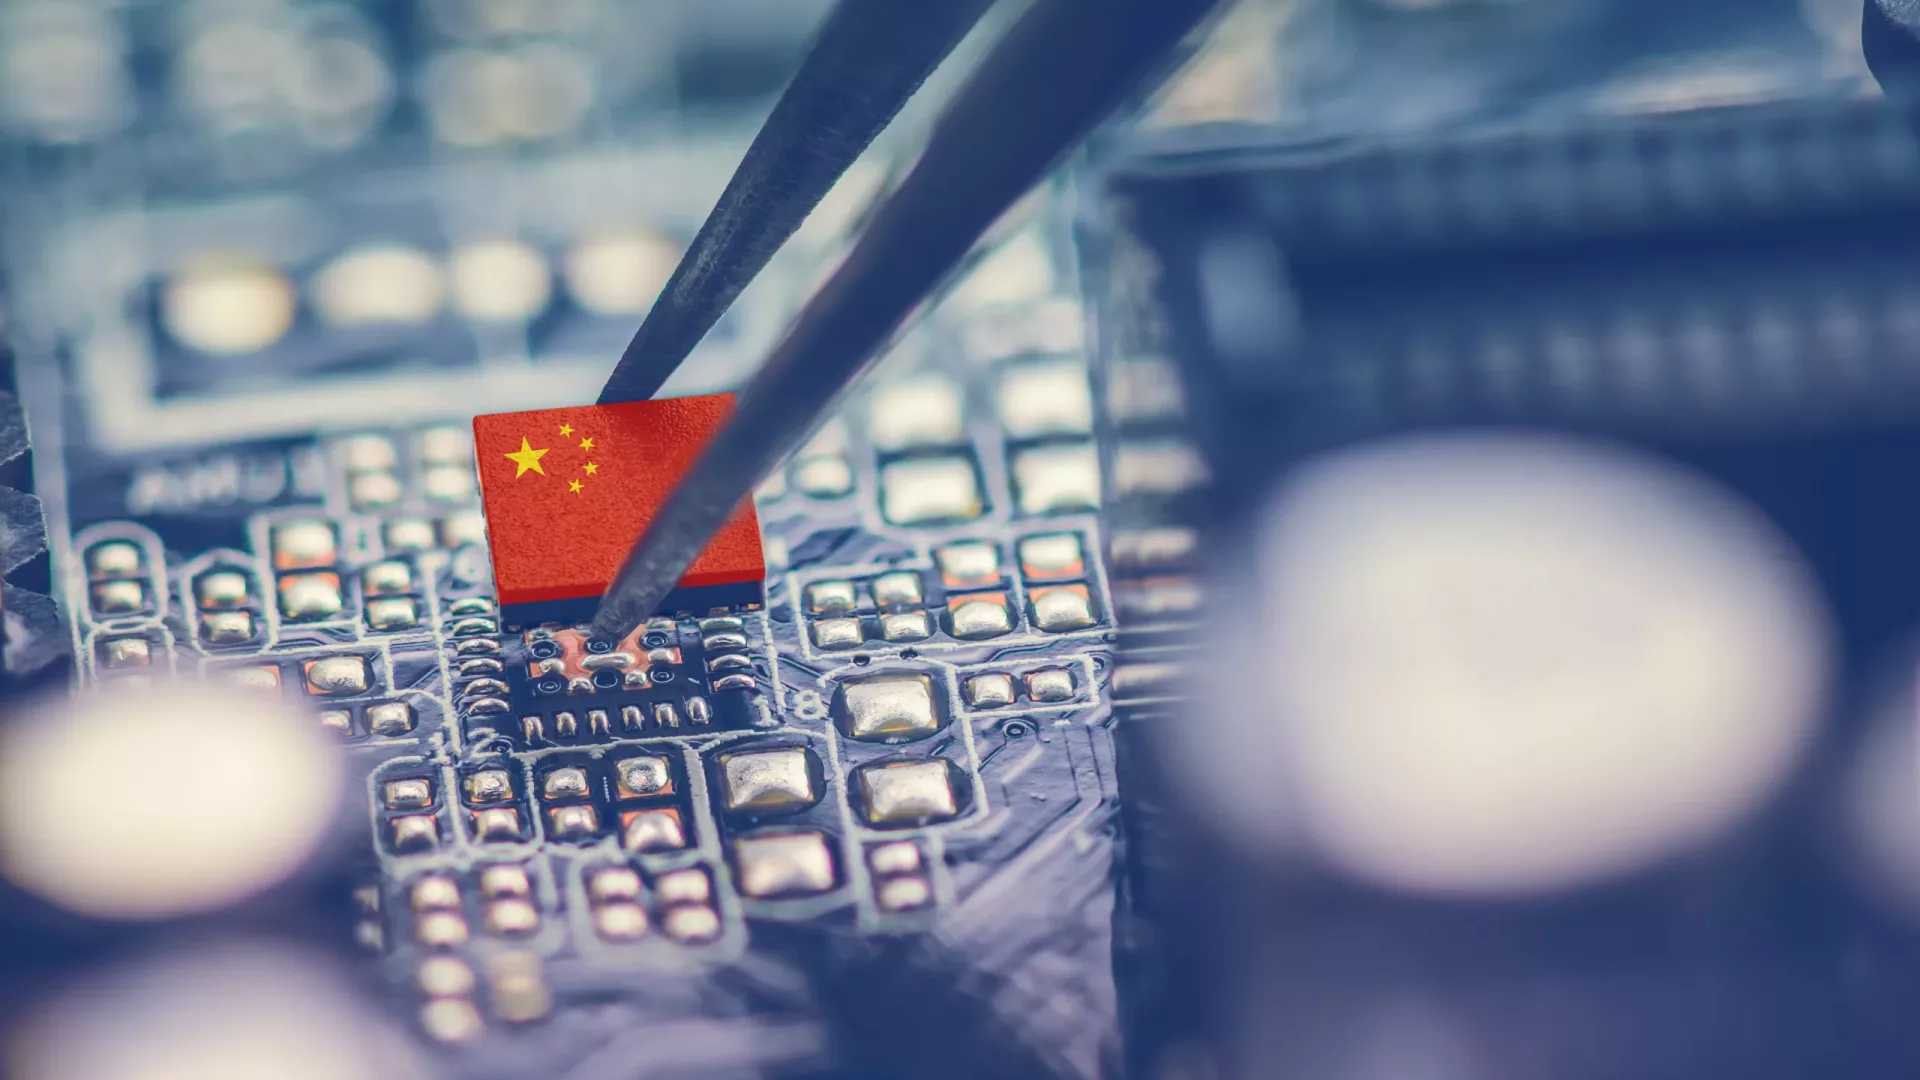 China's flag on a processor chip